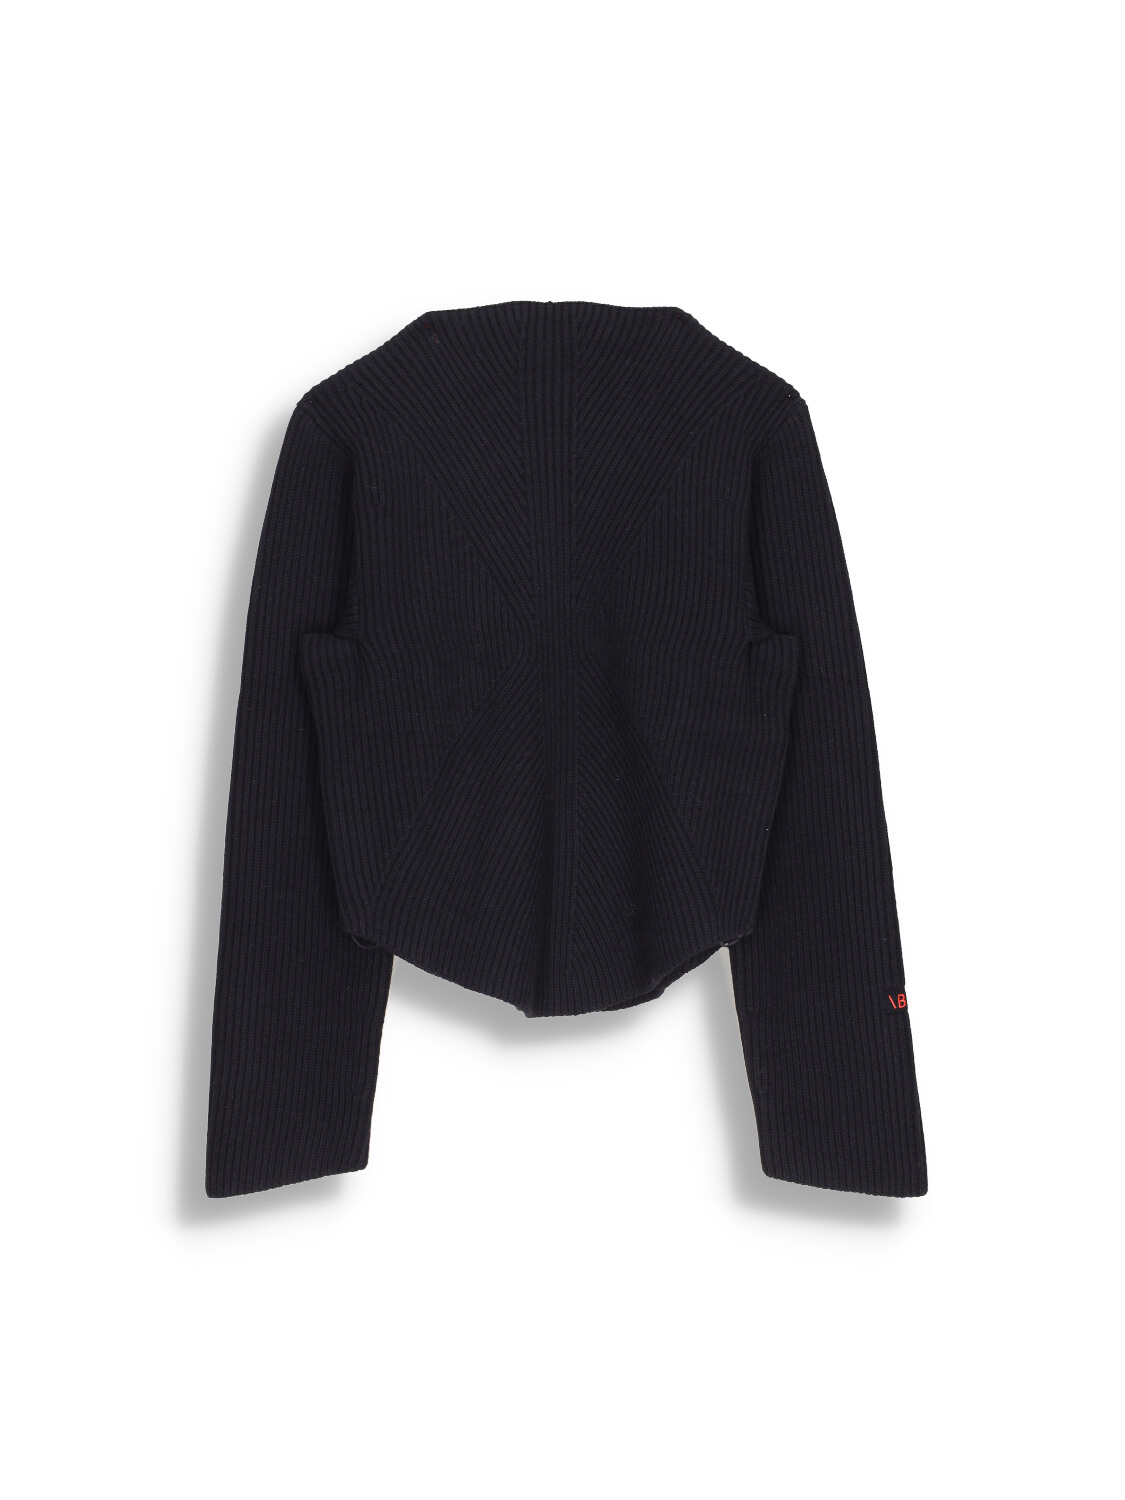 Circle - Sweater with scoop neckline and rounded waistband